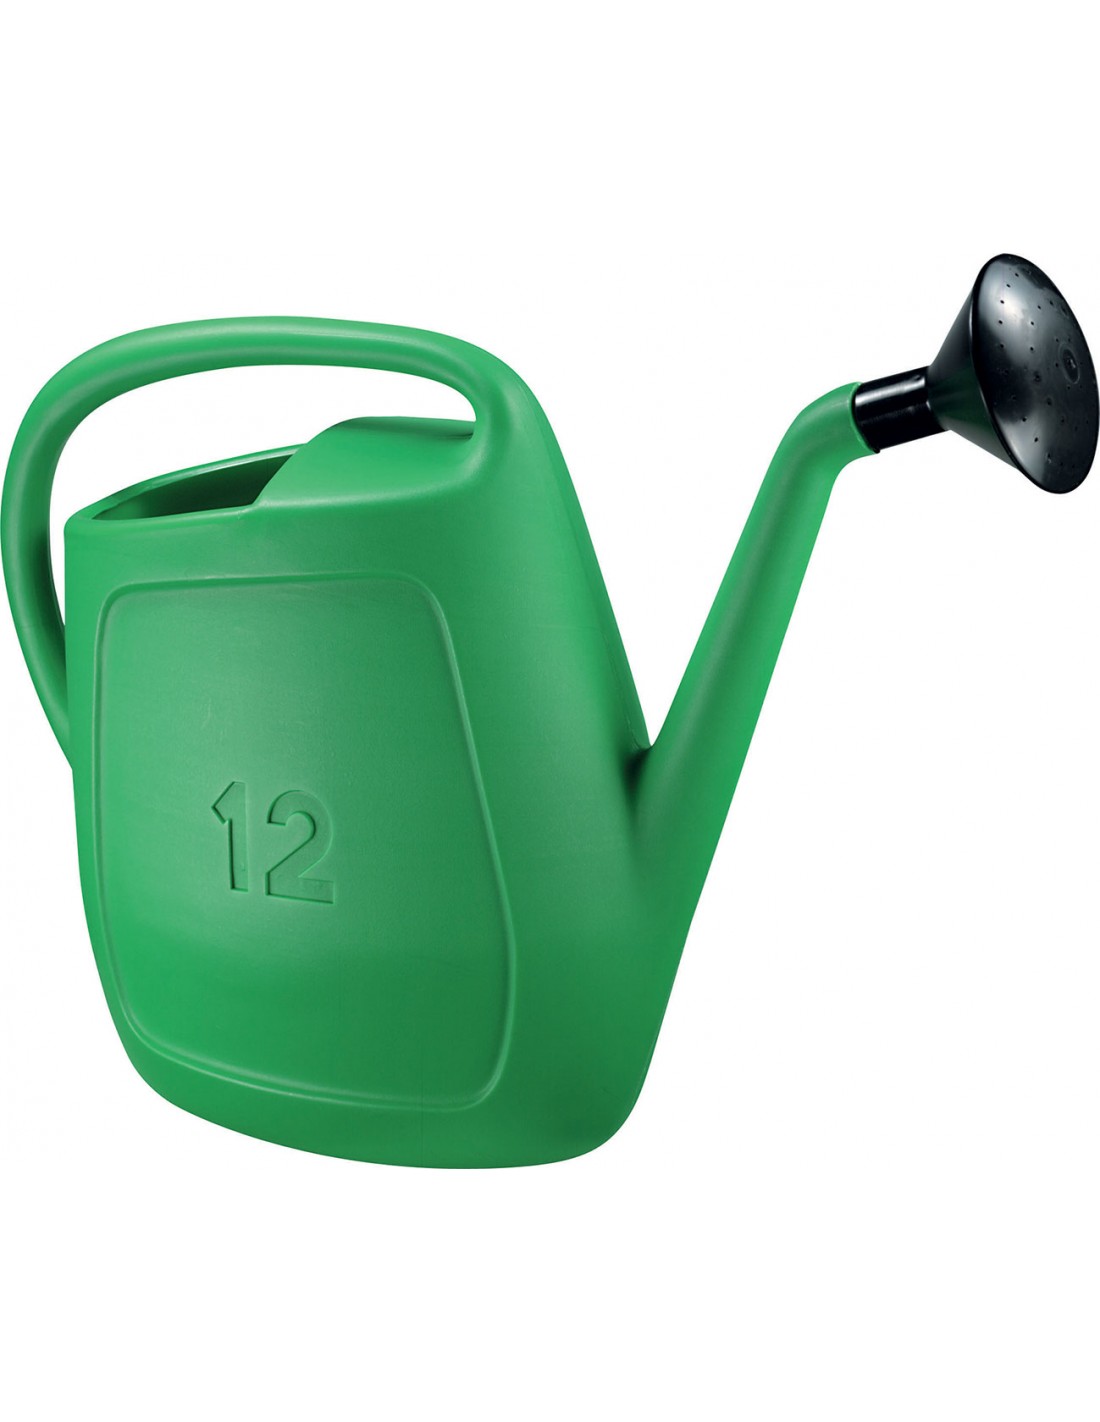 SIRSA WATERING CAN 12LT